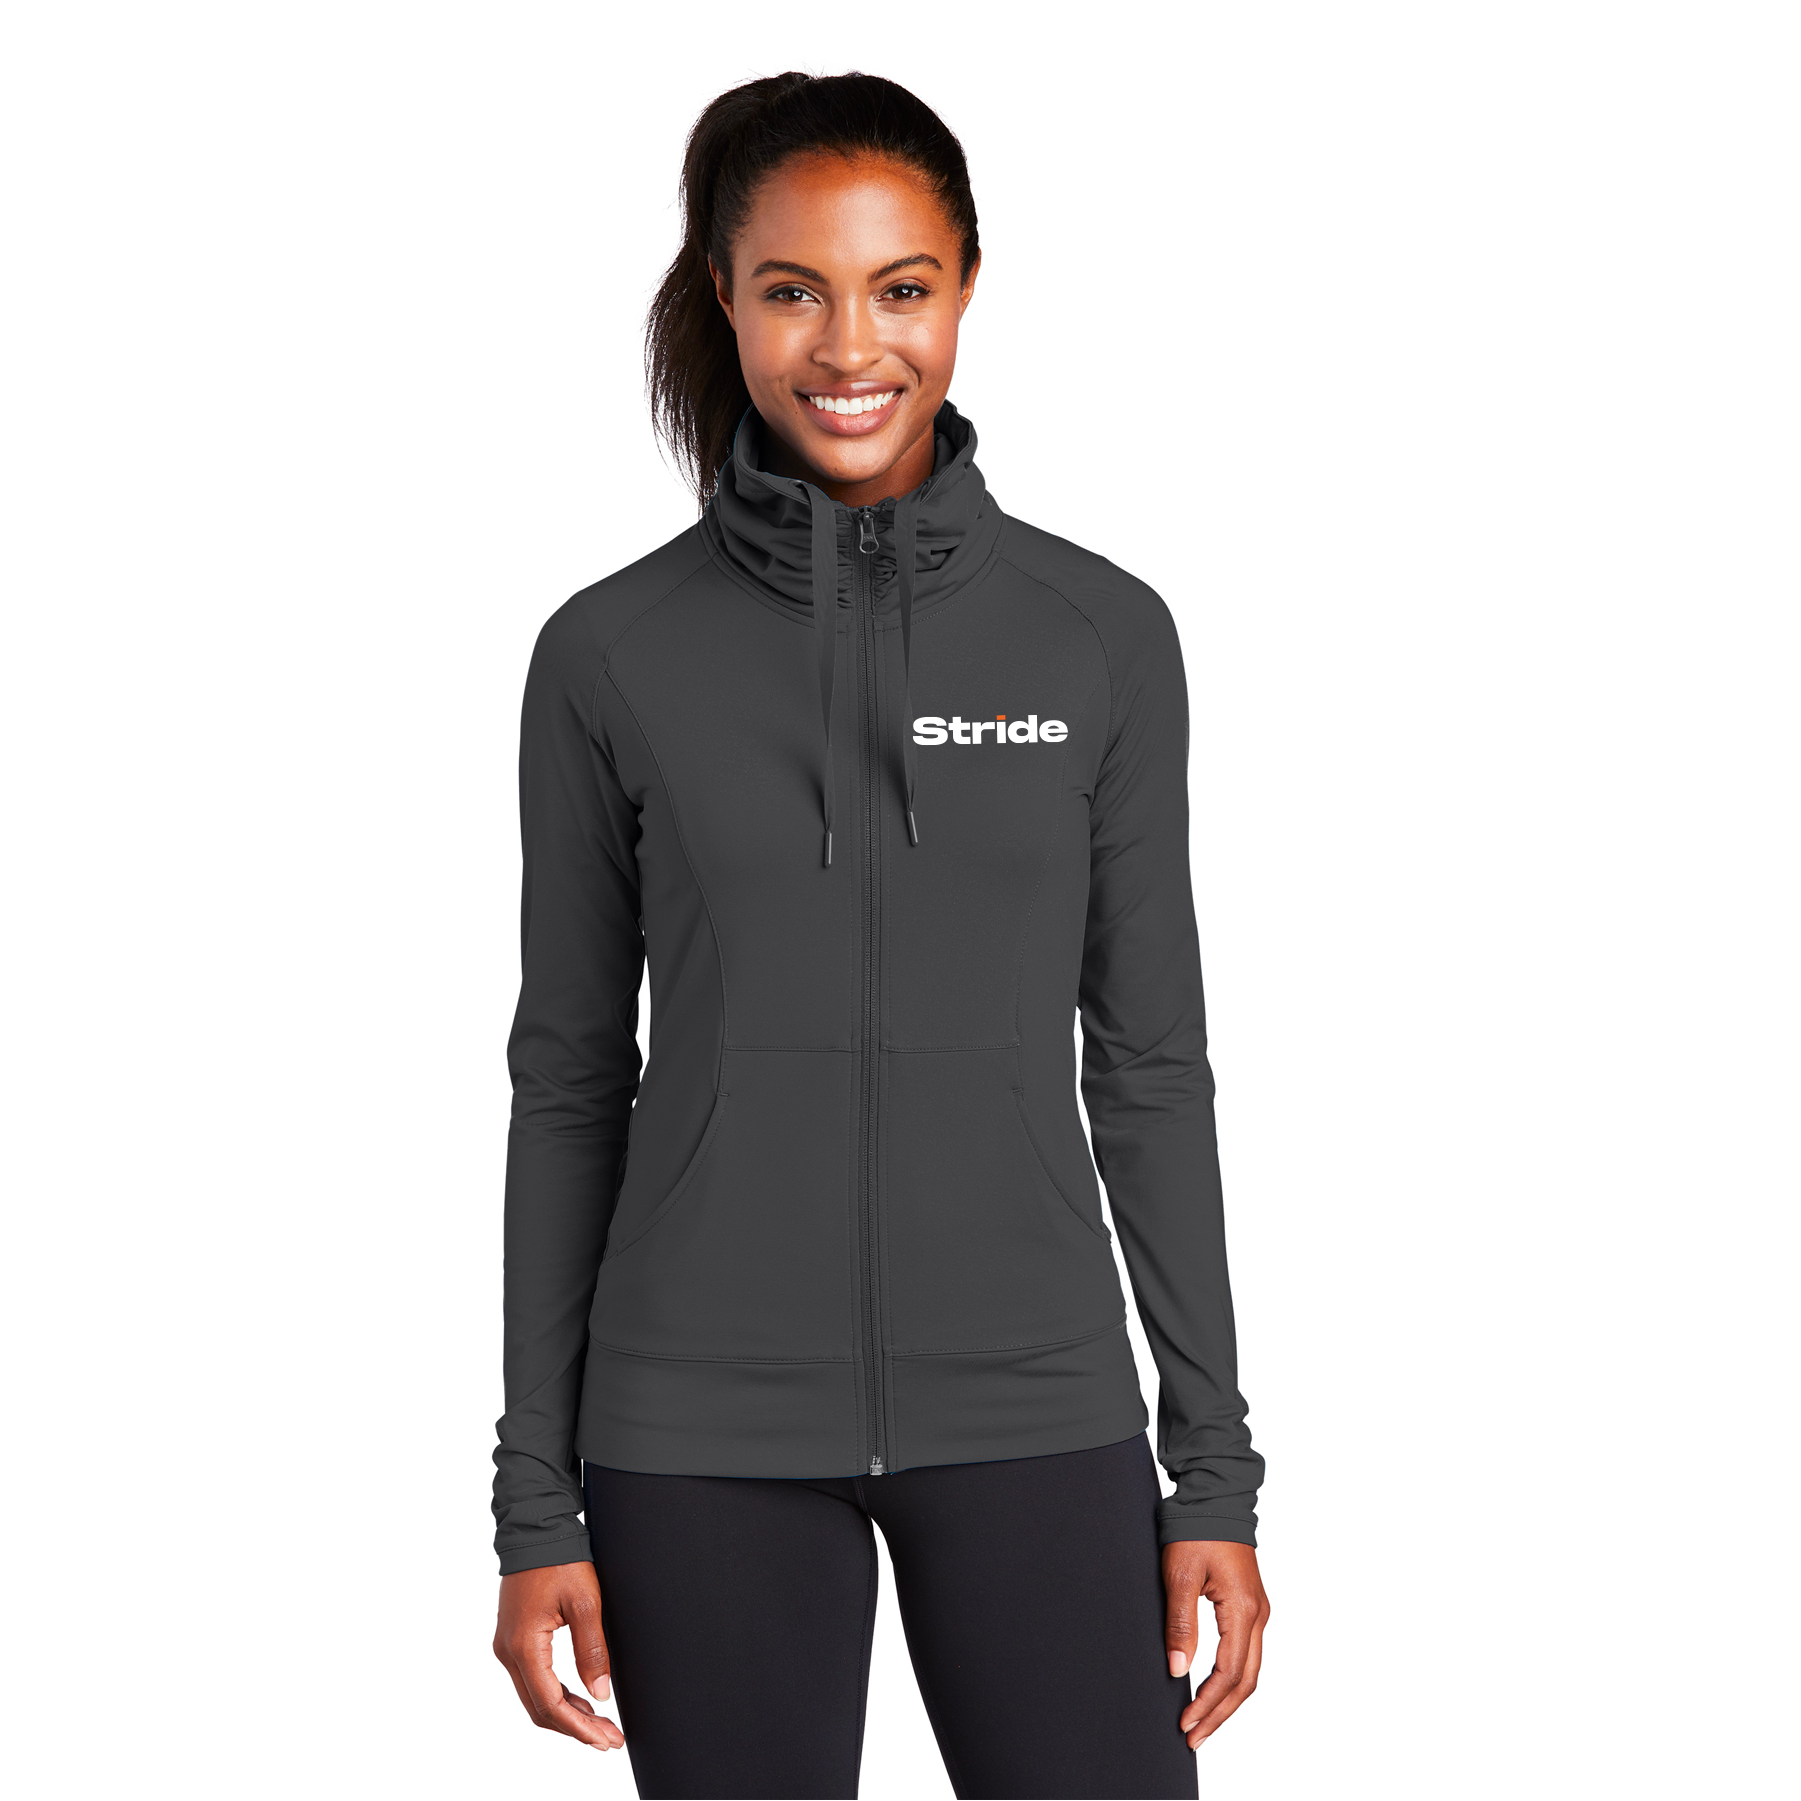 STRIDE EMBROIDERED SPORT-WICK STRETCH FULL-ZIP JACKET